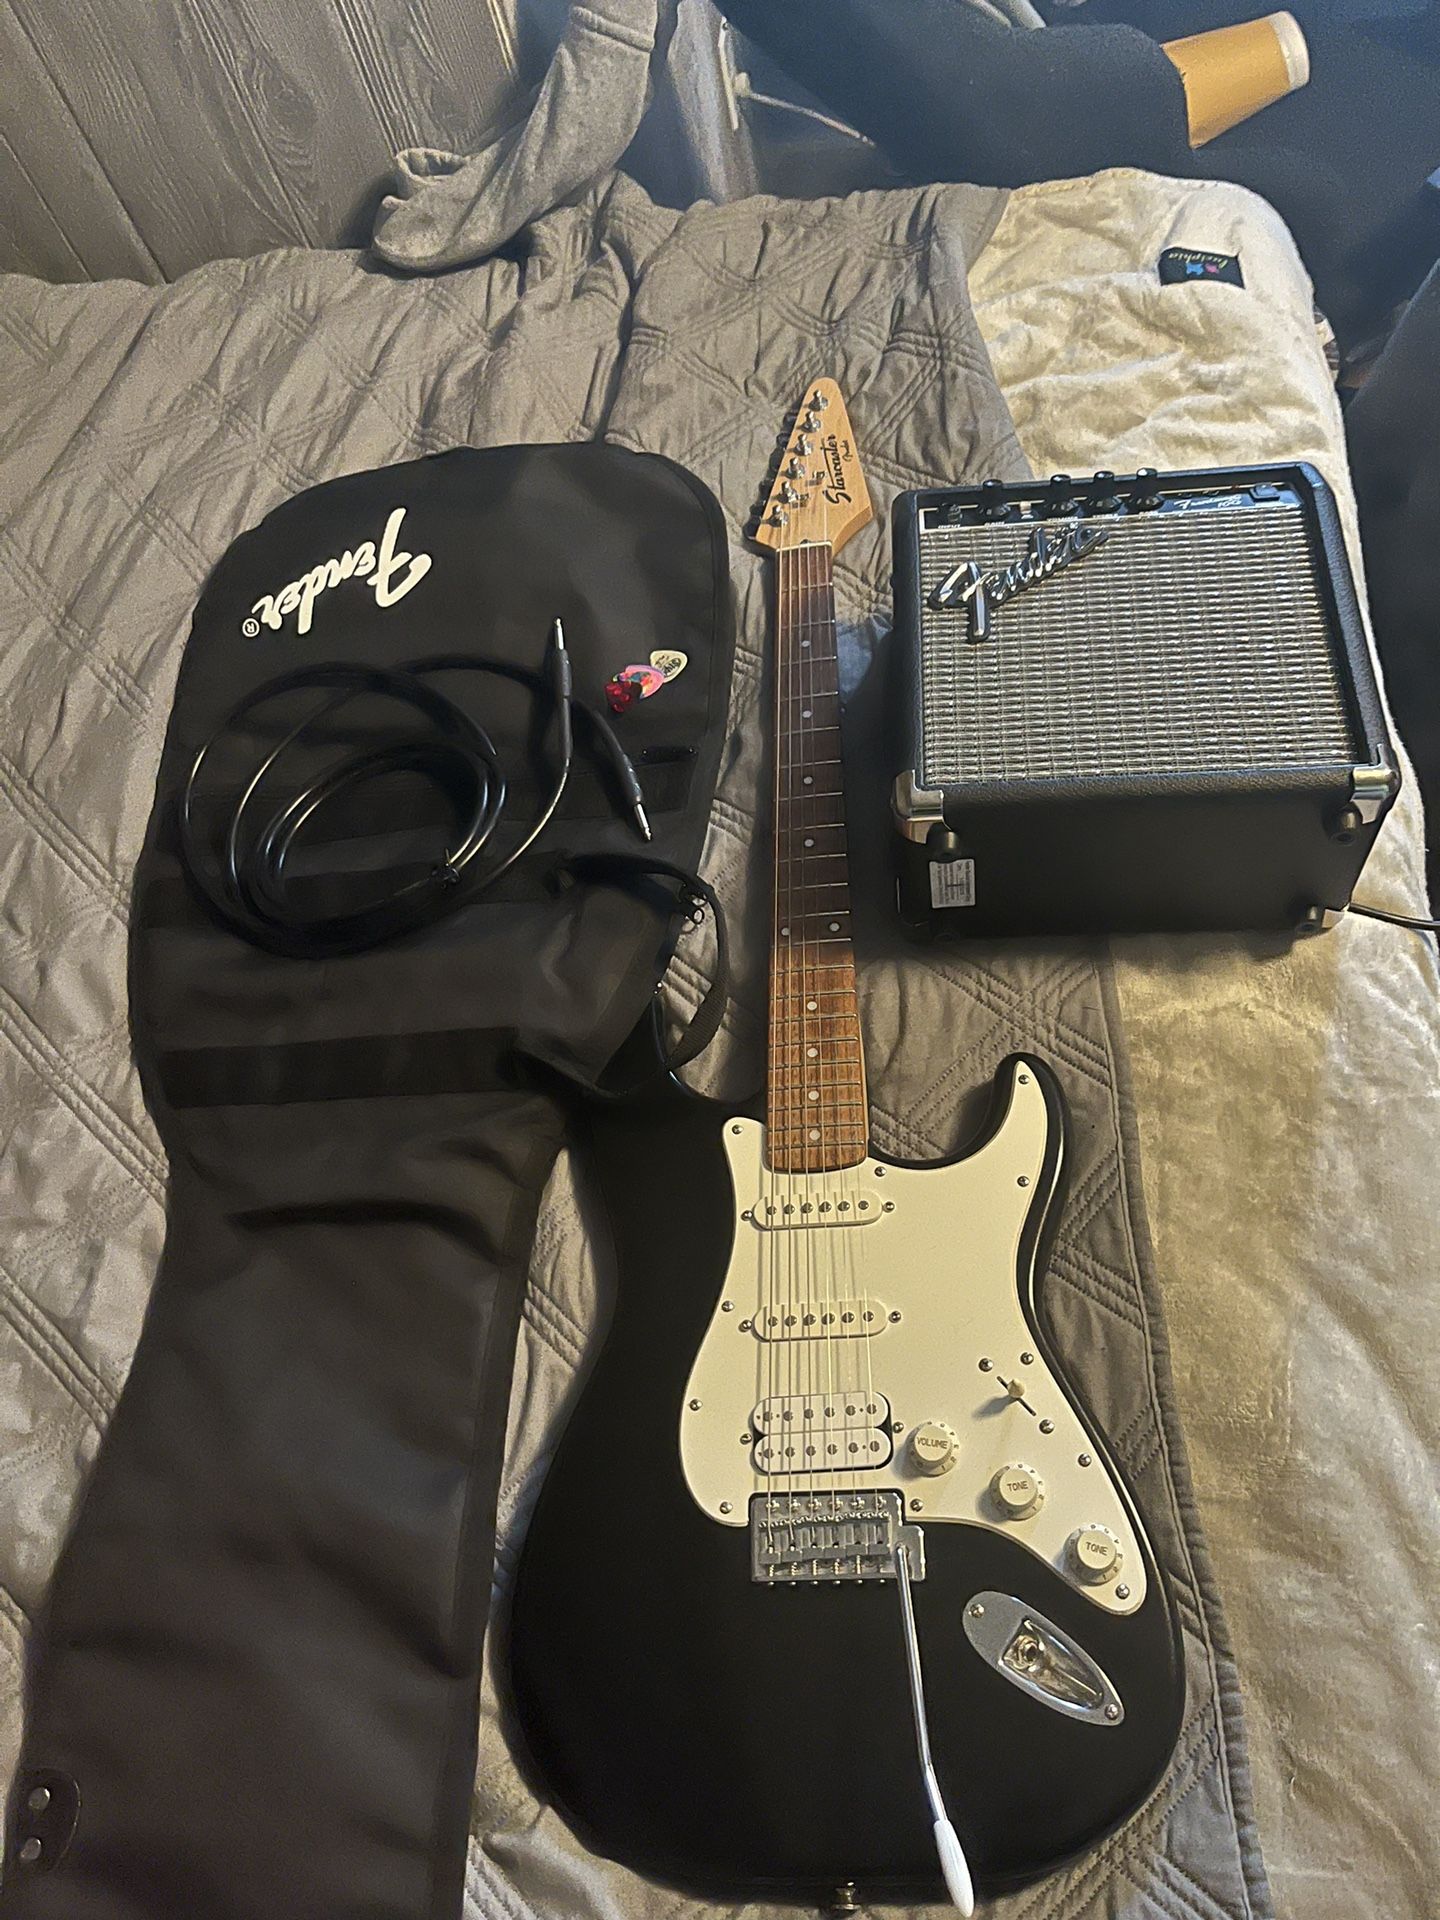 Fender Starcaster Classic guitar w/ Gig Bag, Amp, Amp Cable, And Picks